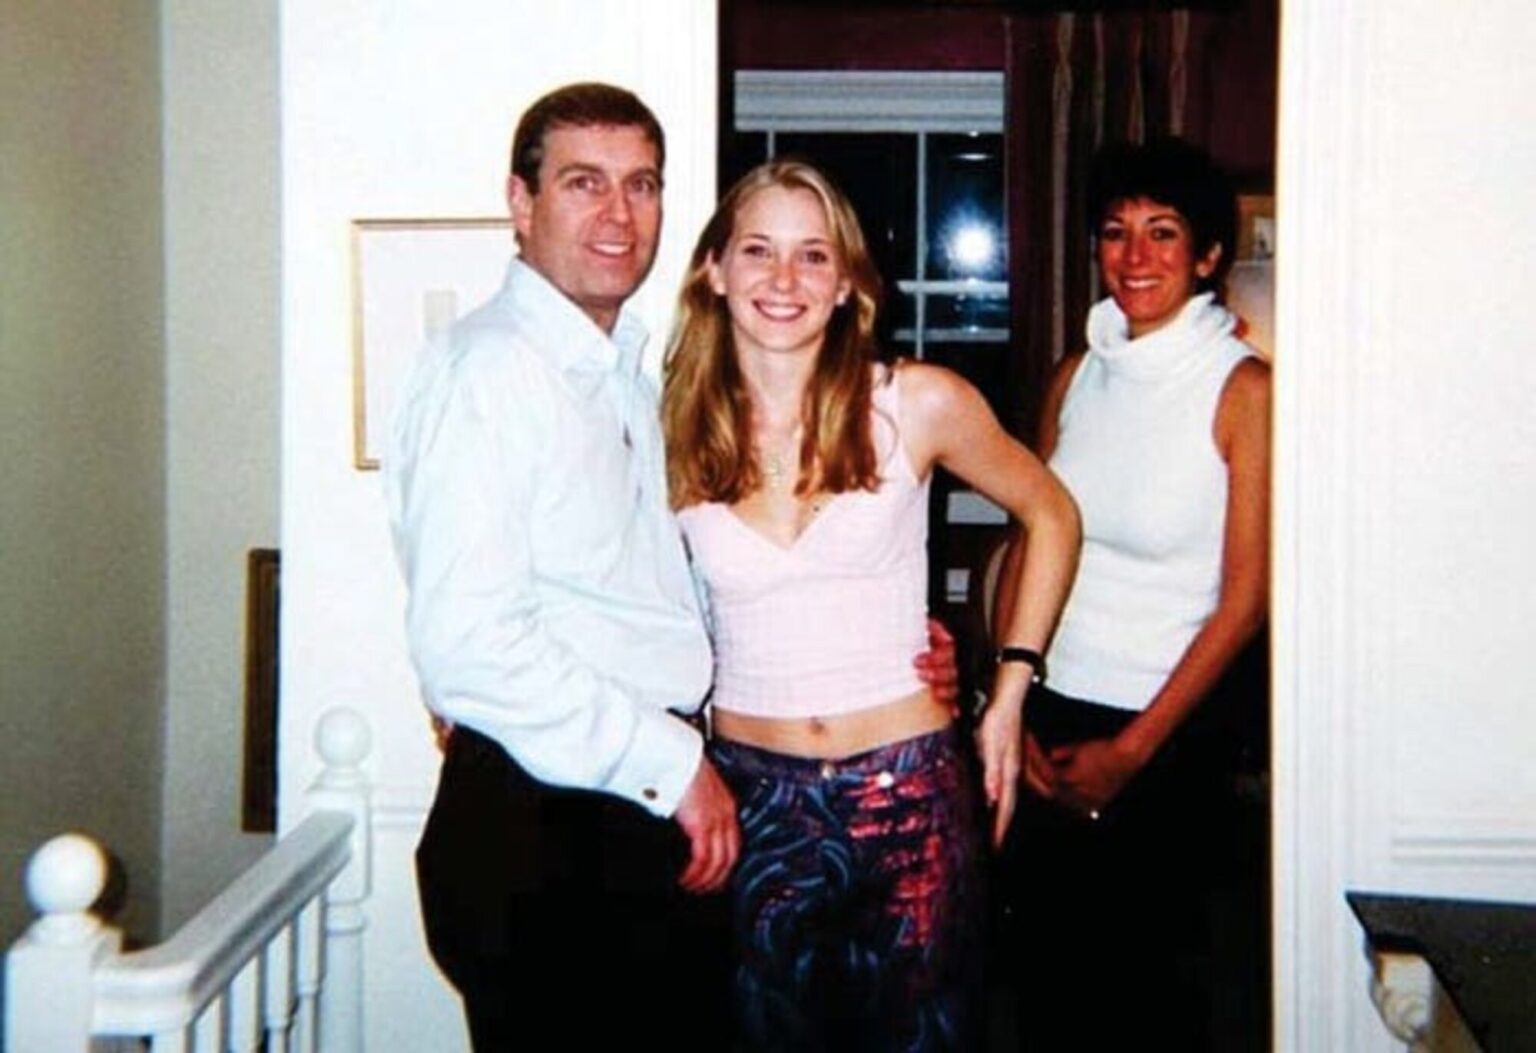 Prince Andrew claims that he is innocent from his accuser's claims, but old pictures of him may prove otherwise. Let's take a look at the details here.